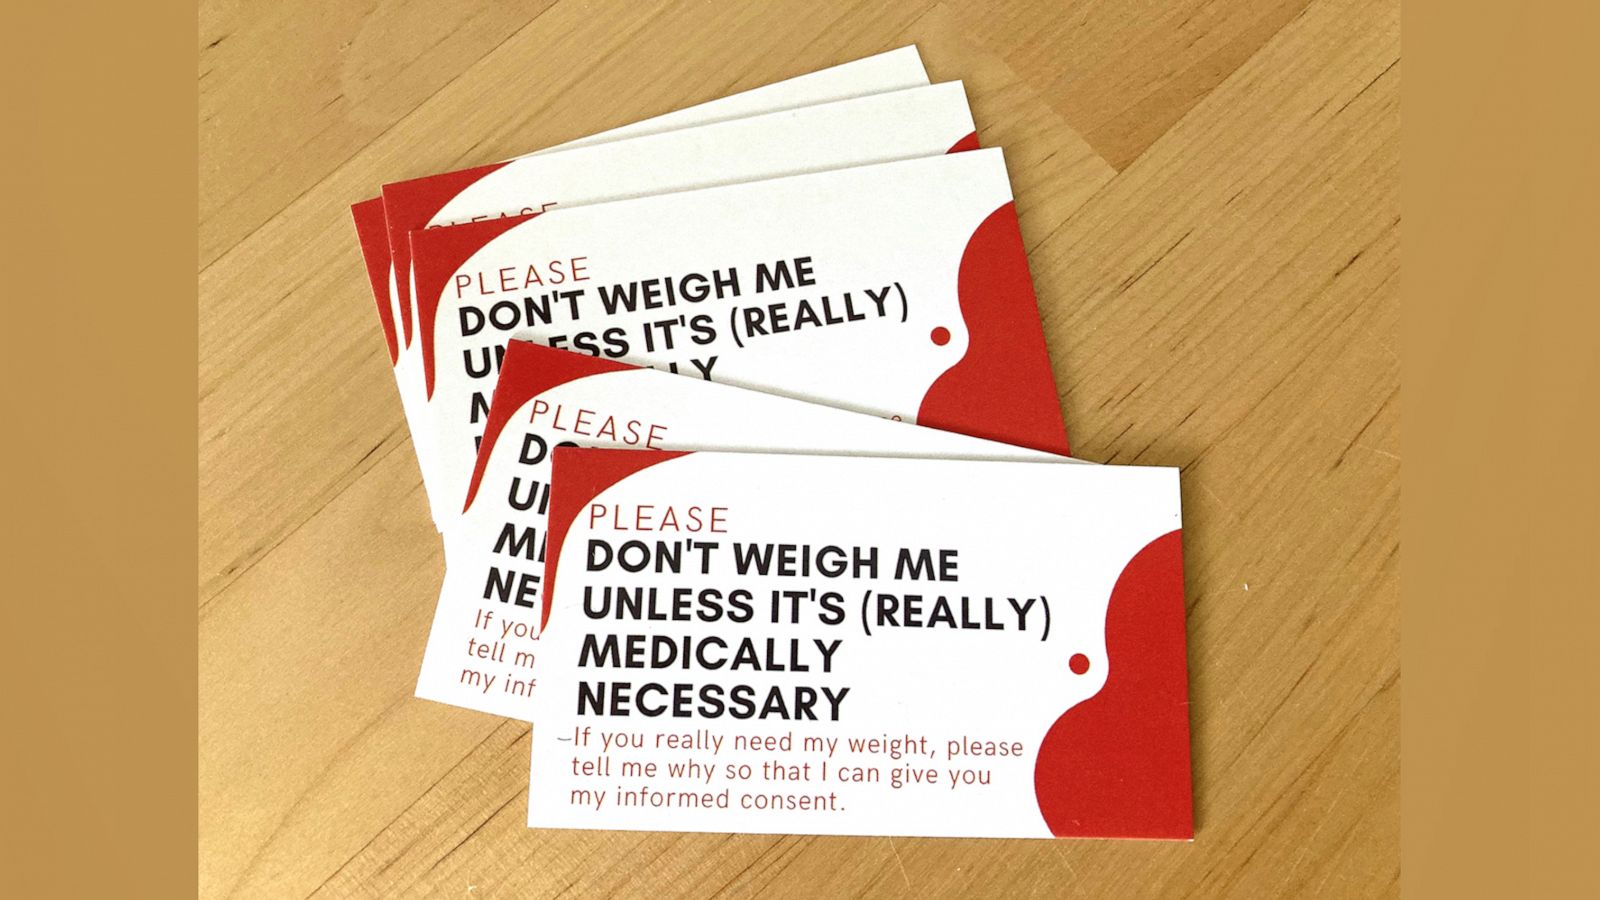 Weigh cards designed to empower people to skip the scale at the doctor's - Good Morning America